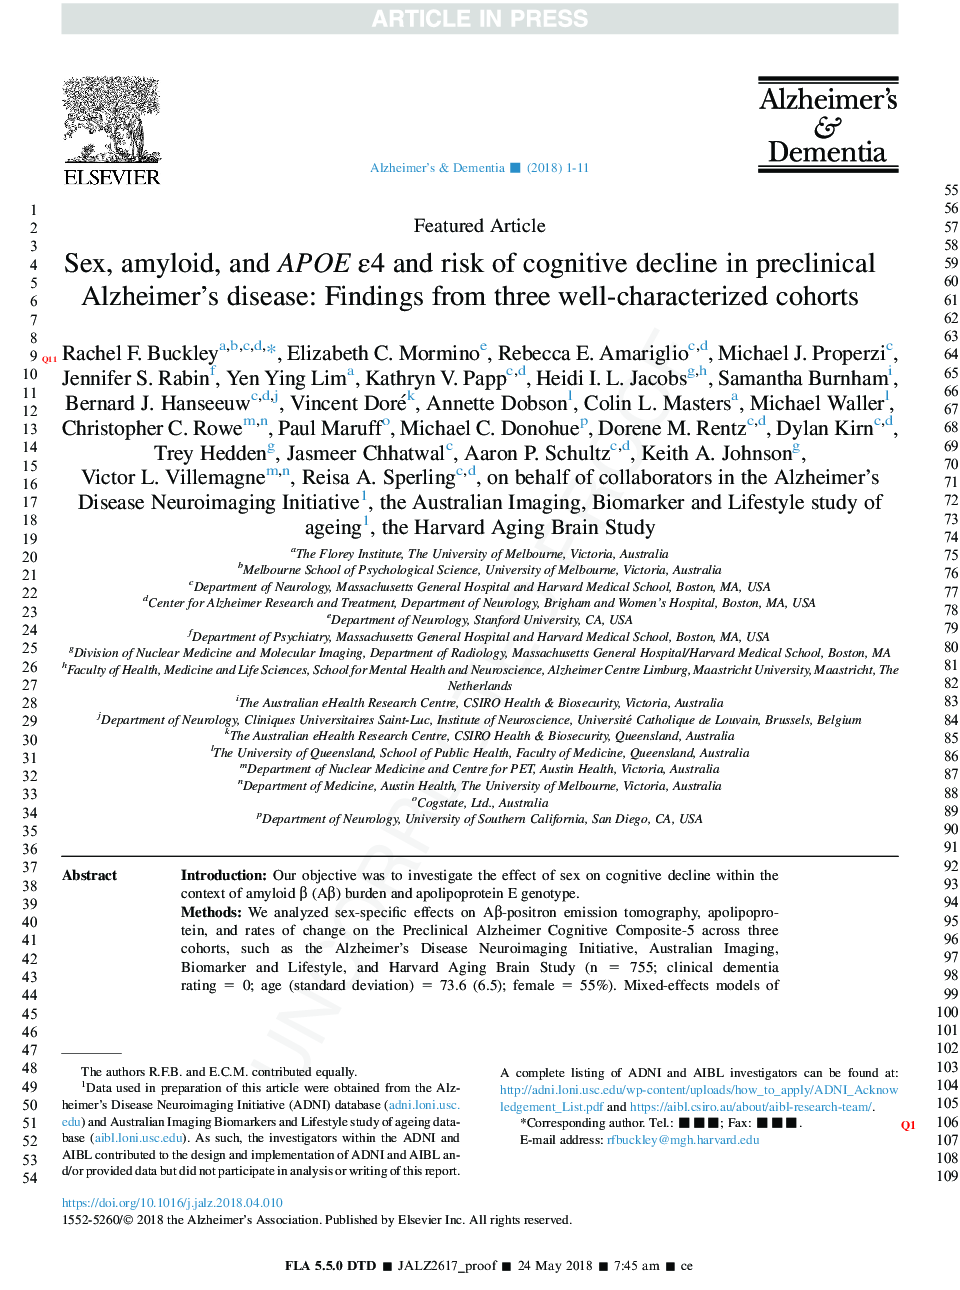 Sex, amyloid, and APOE Îµ4 and risk of cognitive decline in preclinical Alzheimer's disease: Findings from three well-characterized cohorts